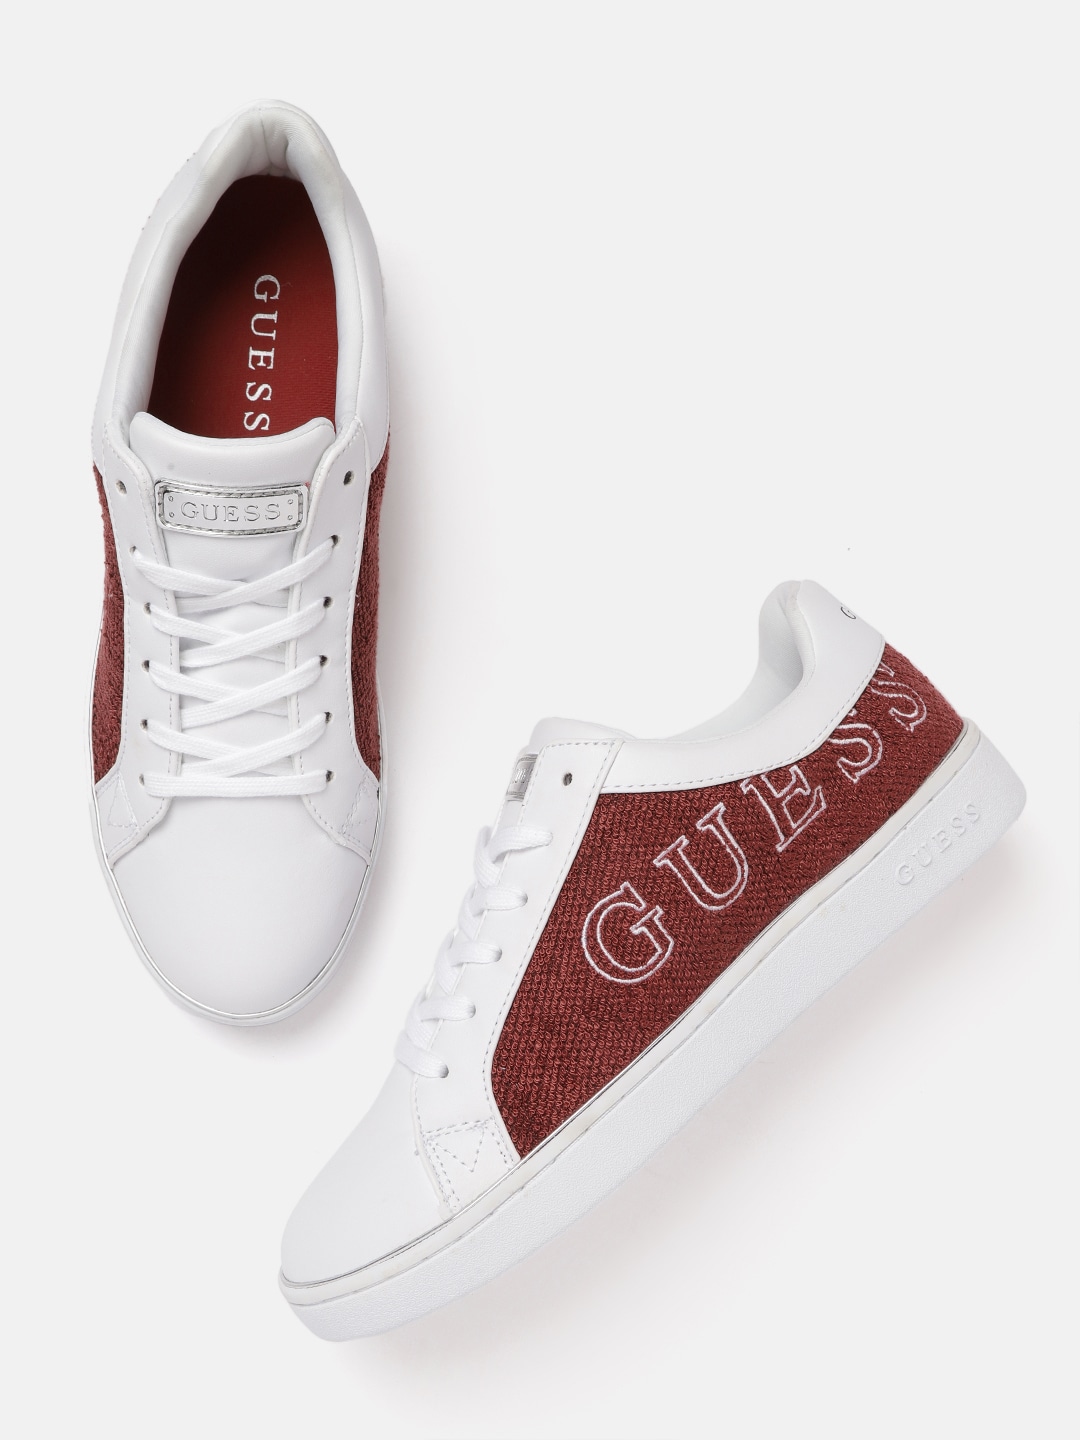 GUESS Women White & Maroon Colourblocked Sneakers Price in India